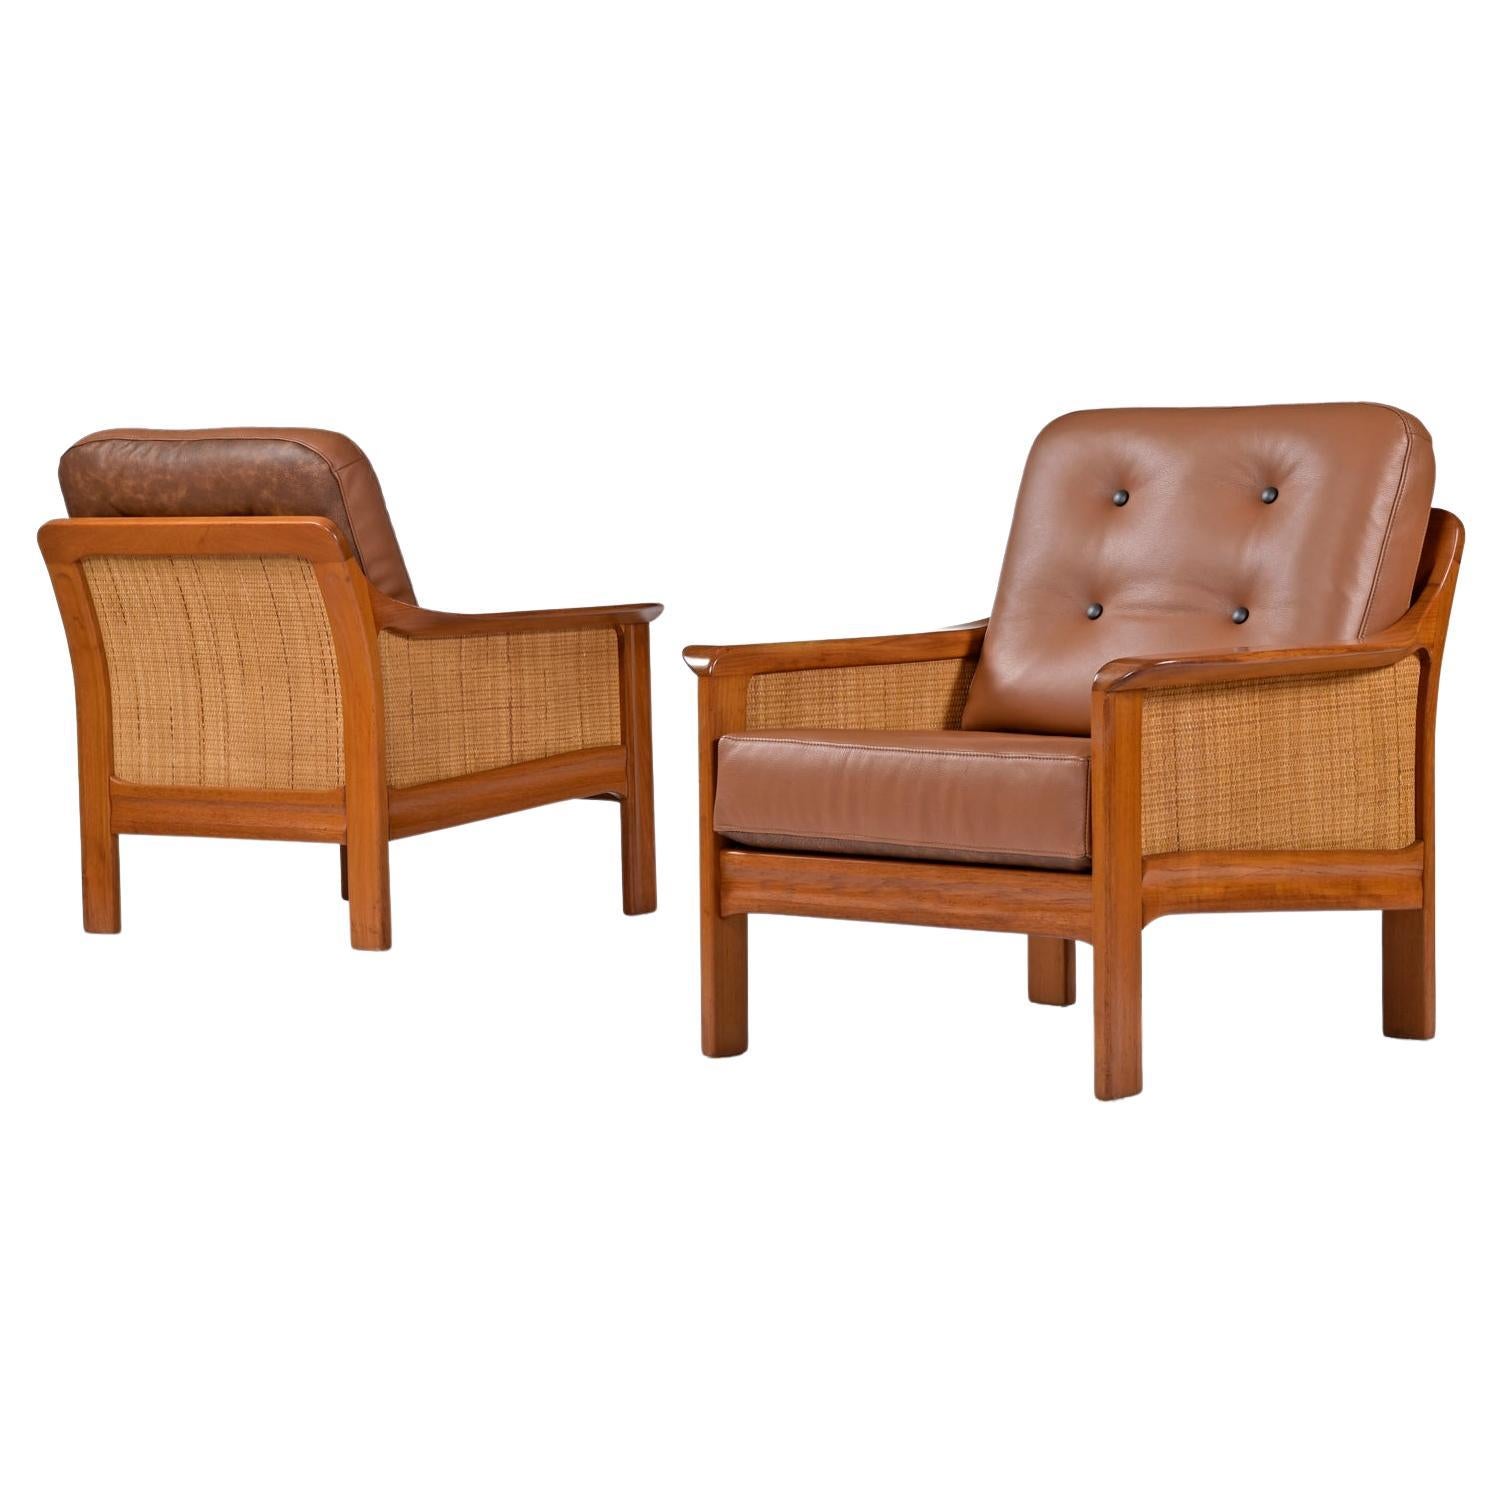 Although not marked by the maker, these exceptional, vintage (late 1970s / early 1980s) solid teak armchairs have a distinctive Danish modern design but may actually be Canadian. The chairs feature 3-panels of woven reed cane that cover the sides